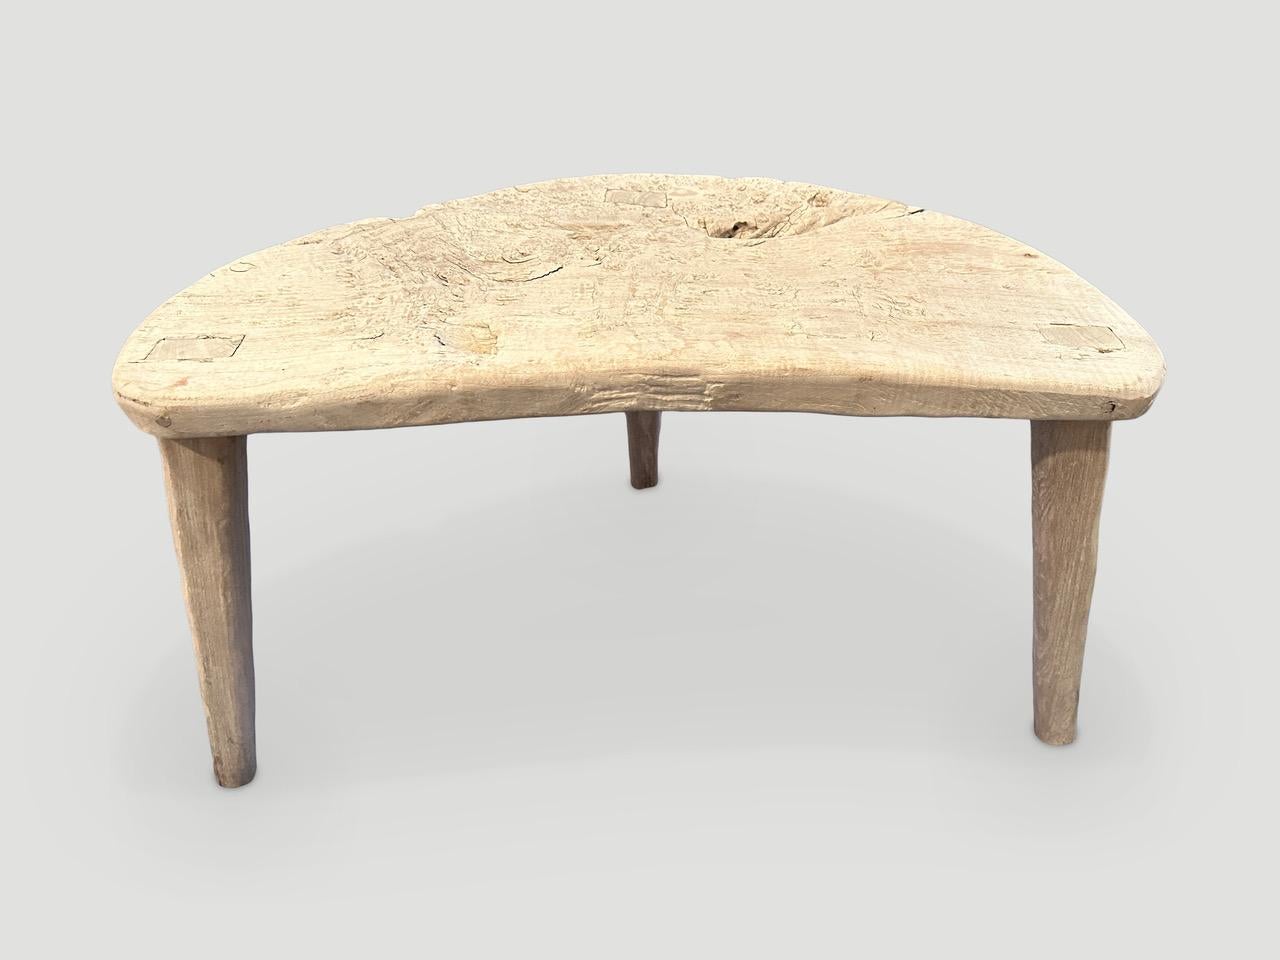 Reclaimed bleached wood side table. We added minimalist legs to this organic aged slab top. Both usable and sculptural.

The St. Barts Collection features an exciting line of organic white wash, bleached and natural weathered teak furniture. The